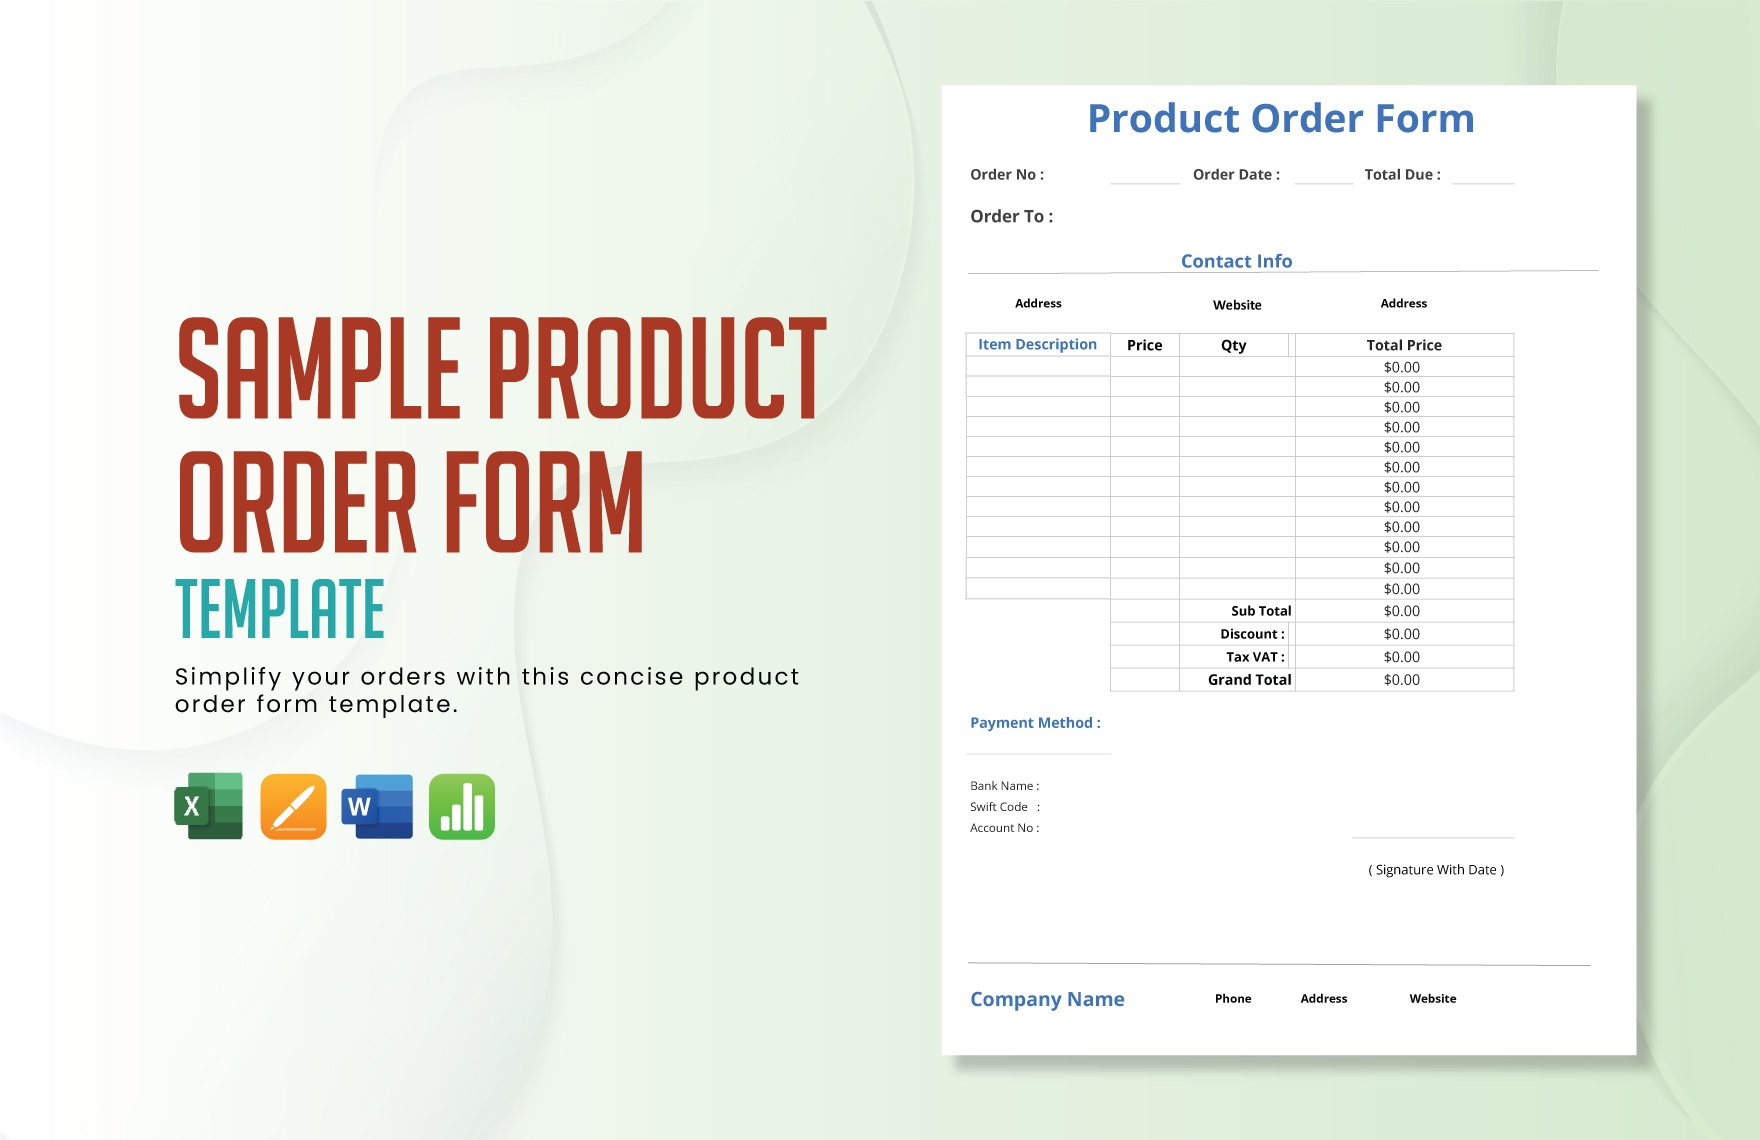 Sample Product Order Form Template in Word, Excel, Apple Pages, Apple Numbers